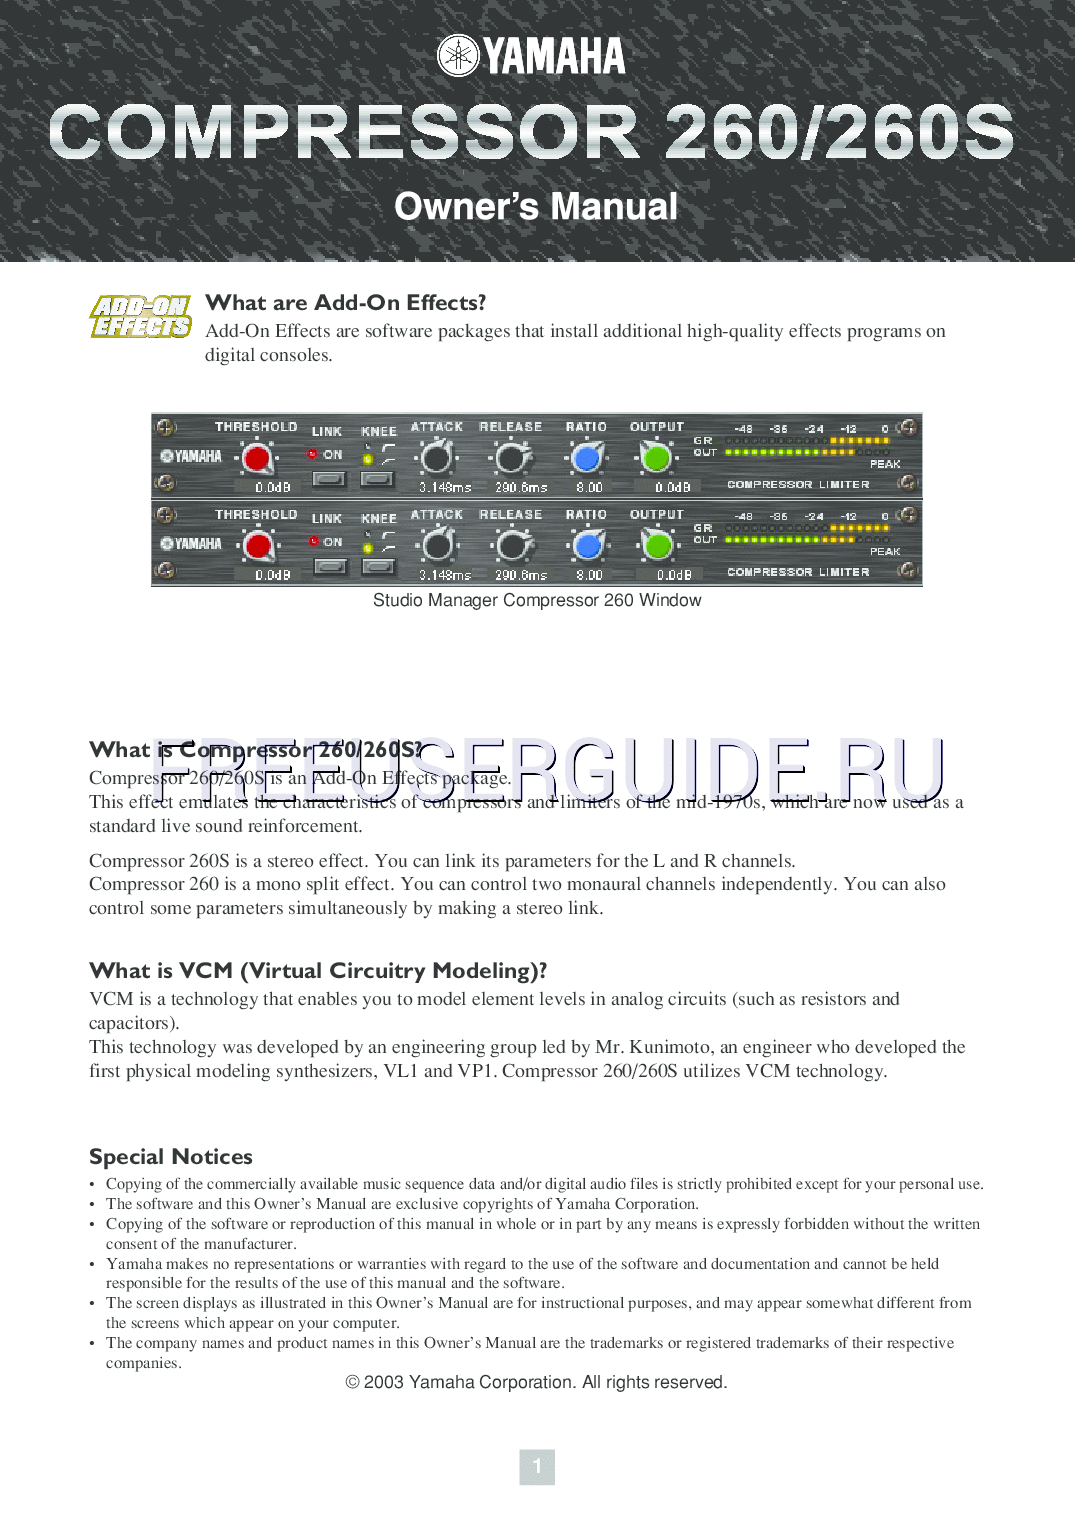 Read online Owner's Manual for Yamaha Add-On Effects (AE011) COMP260/260S (Page 1)